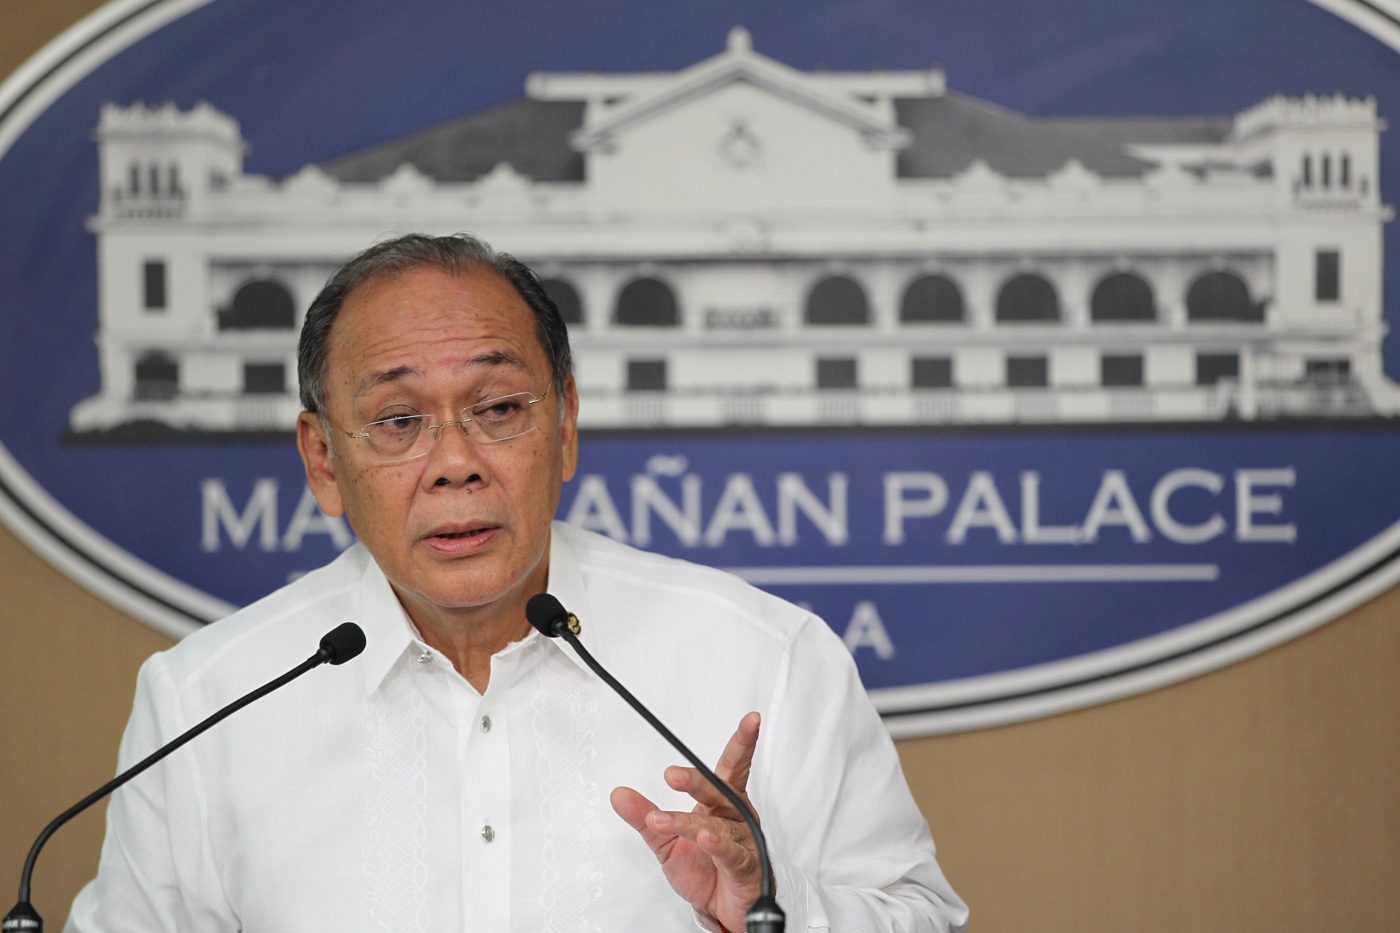 Palace tells EU parliament, ‘Our democracy works’